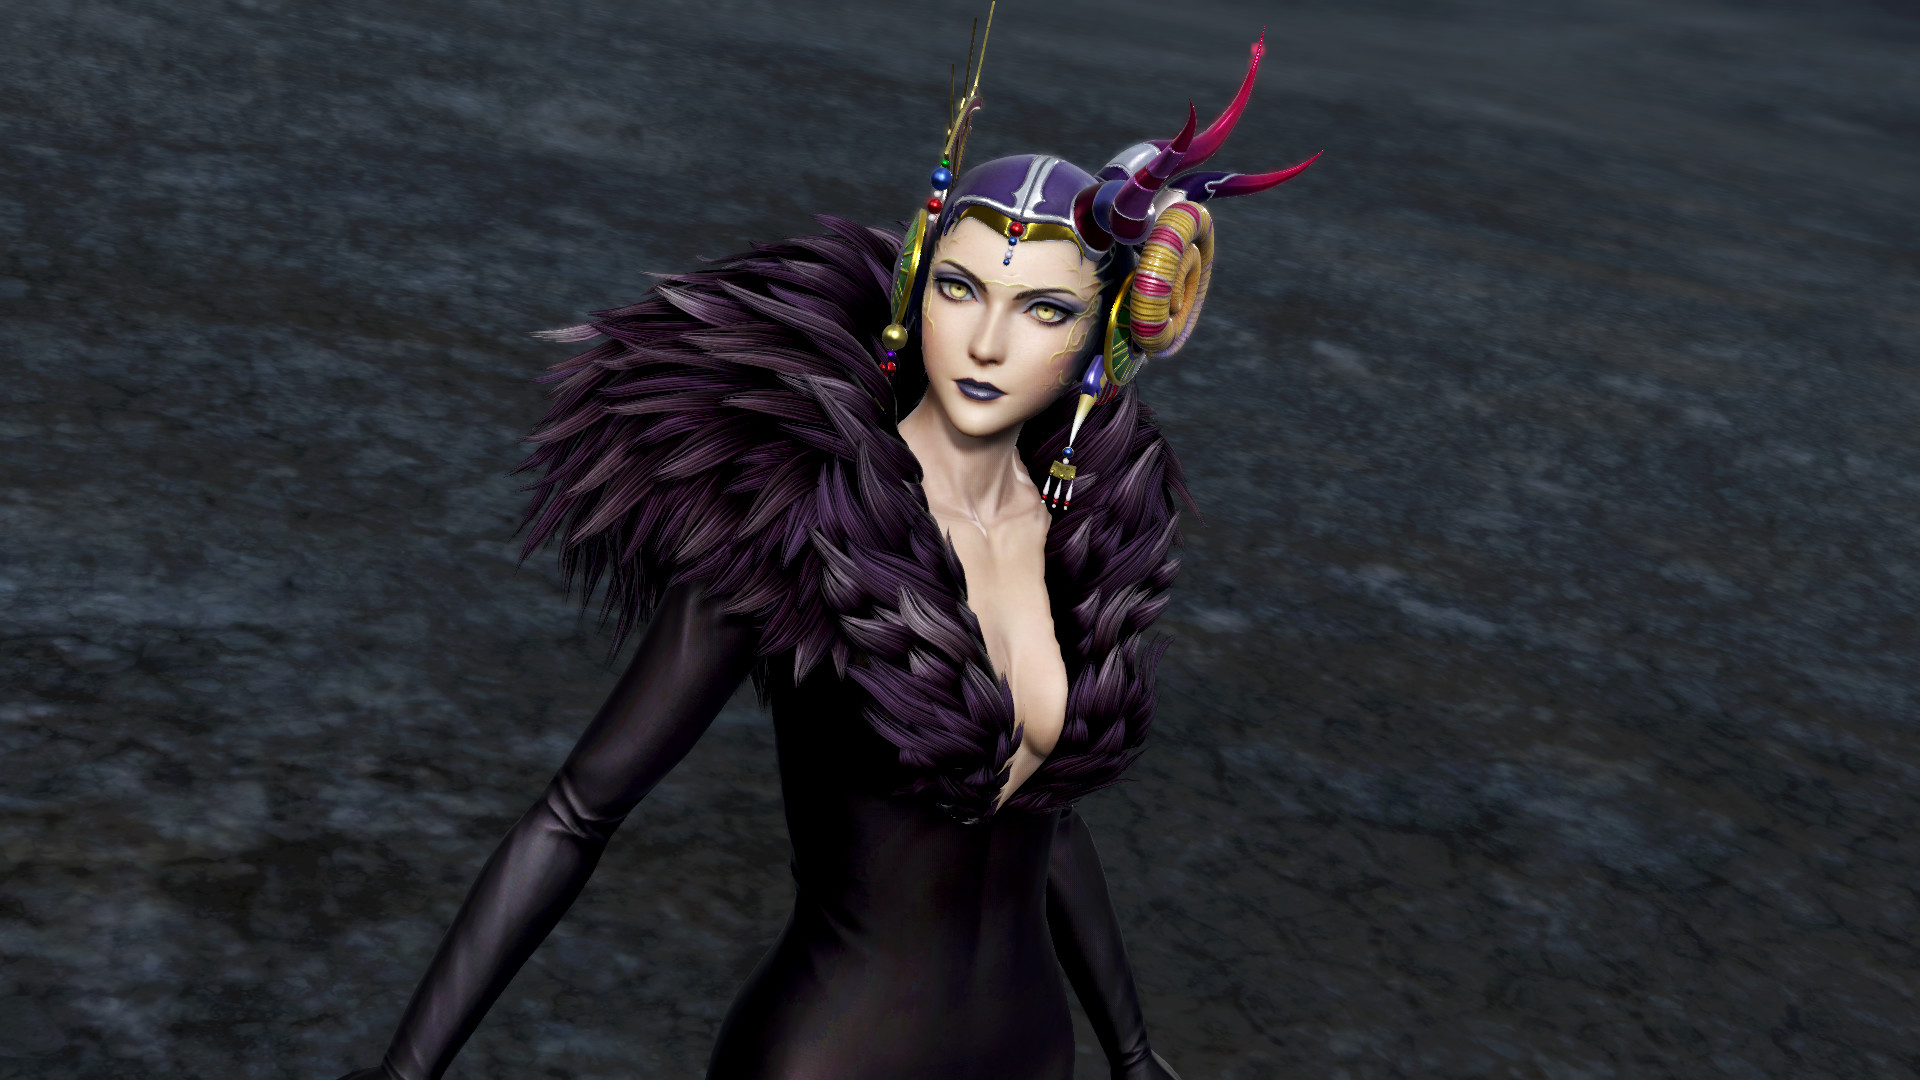 DFF NT: Edea's Corpse Appearance Set for Ultimecia Featured Screenshot #1